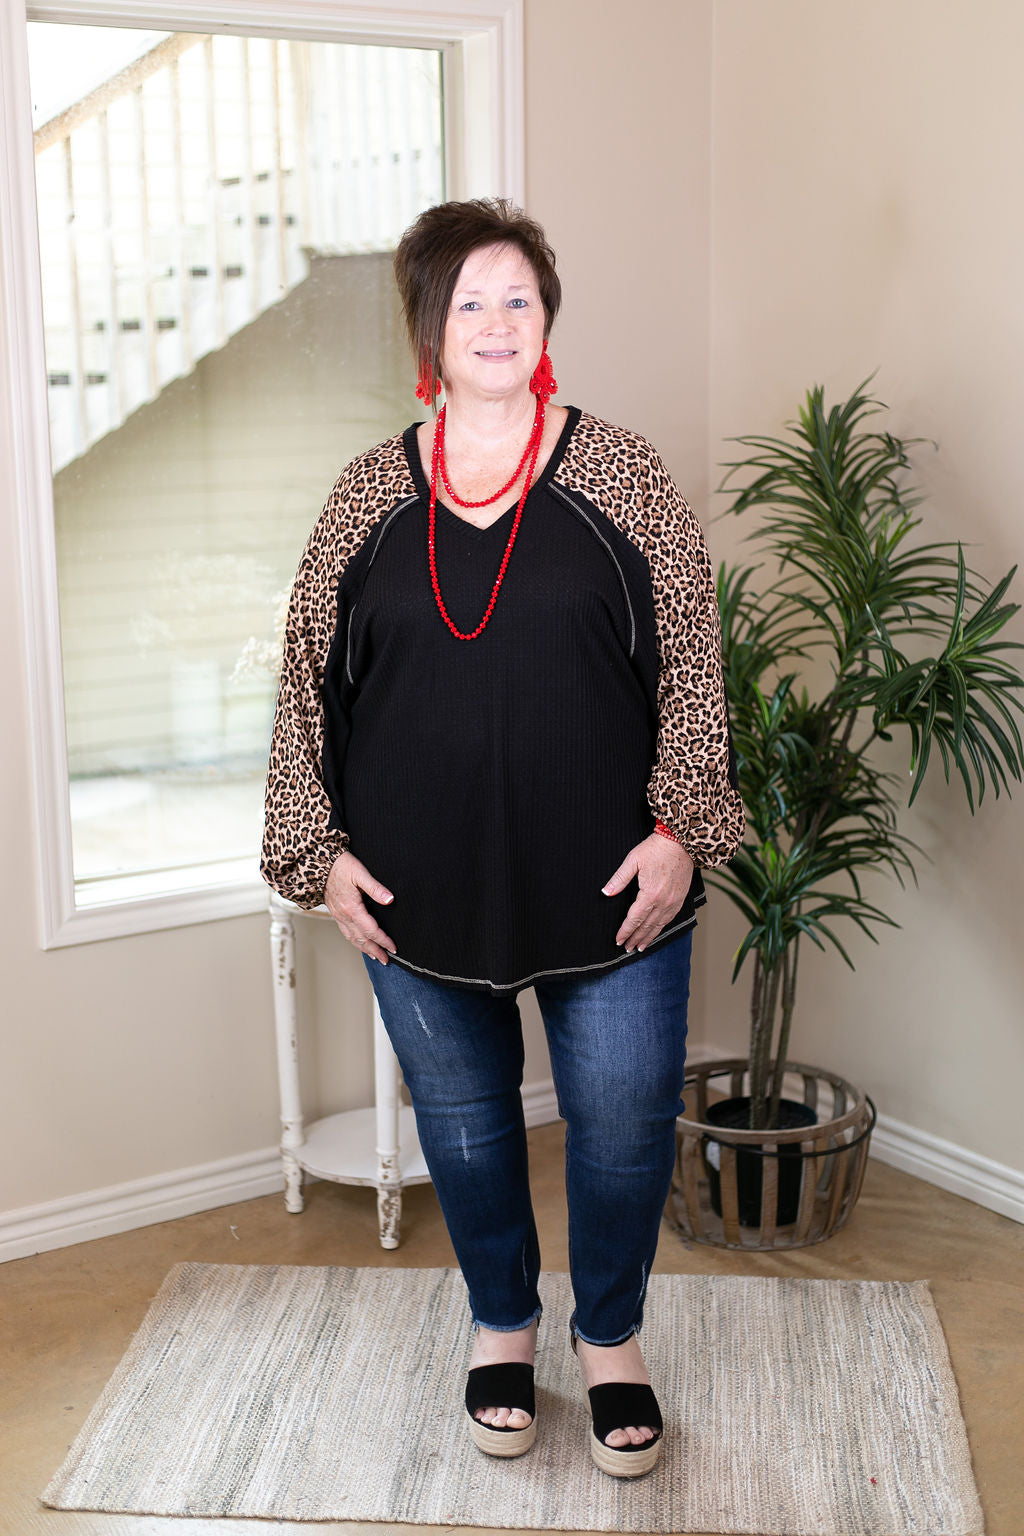 She's Darling Waffle Knit Top with Puff Sleeves and Leopard in Black - Giddy Up Glamour Boutique